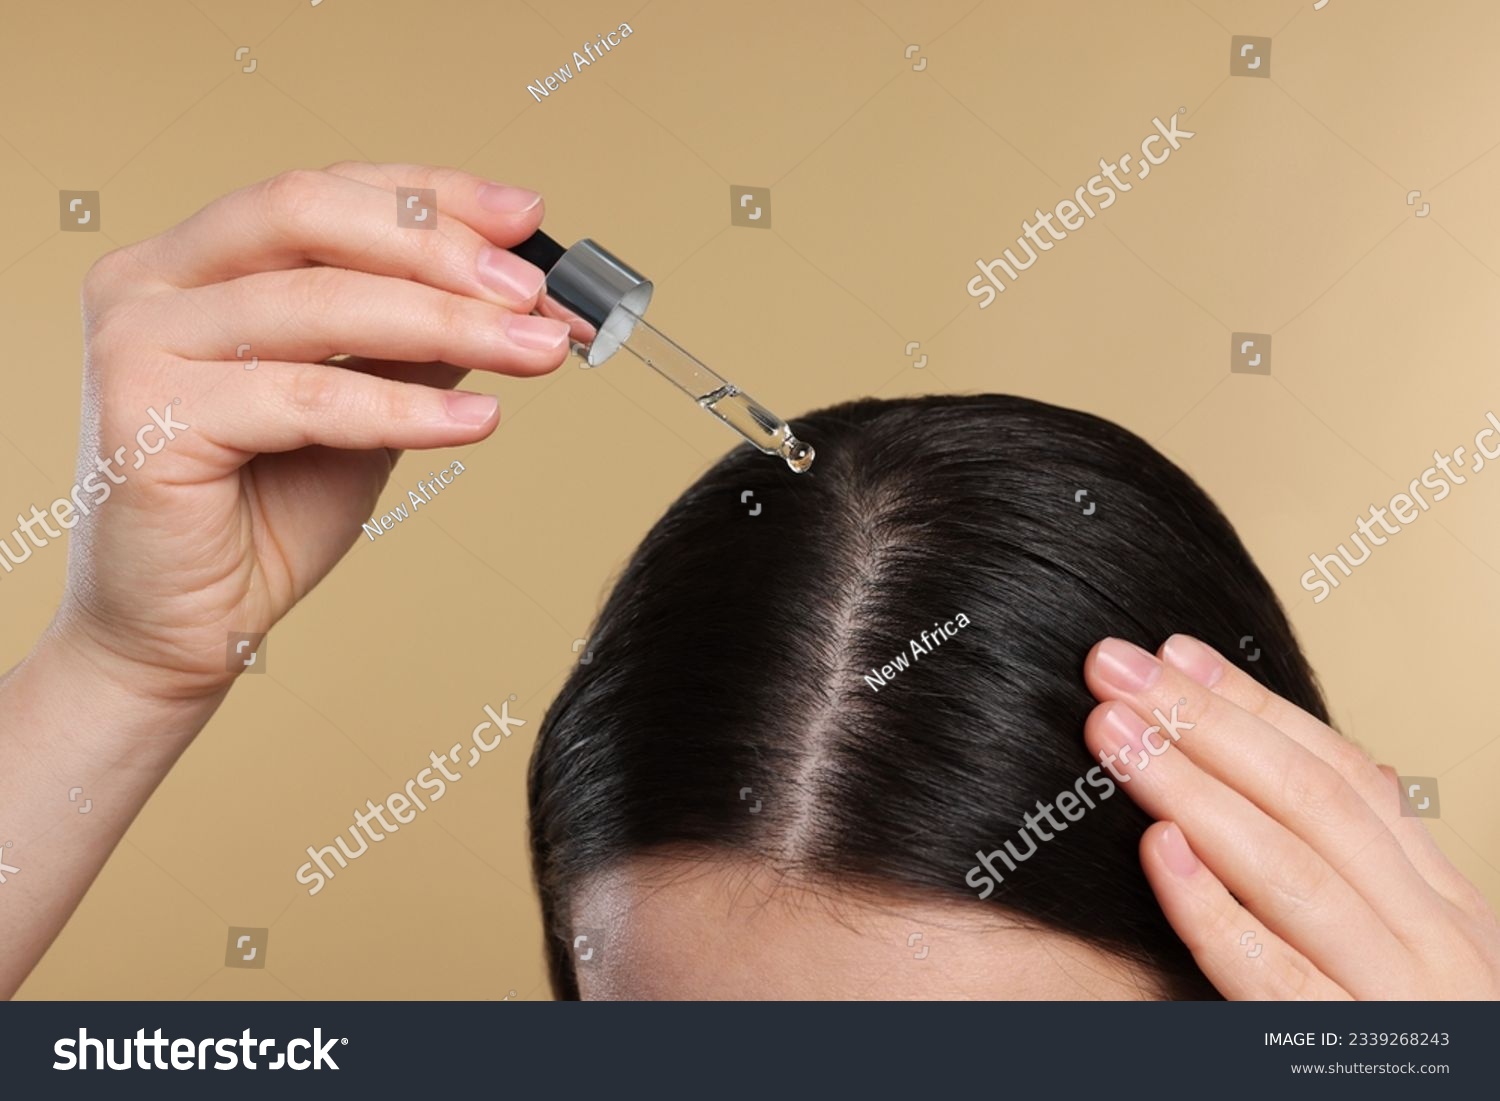 Woman applying essential oil onto hair roots on beige background, closeup #2339268243